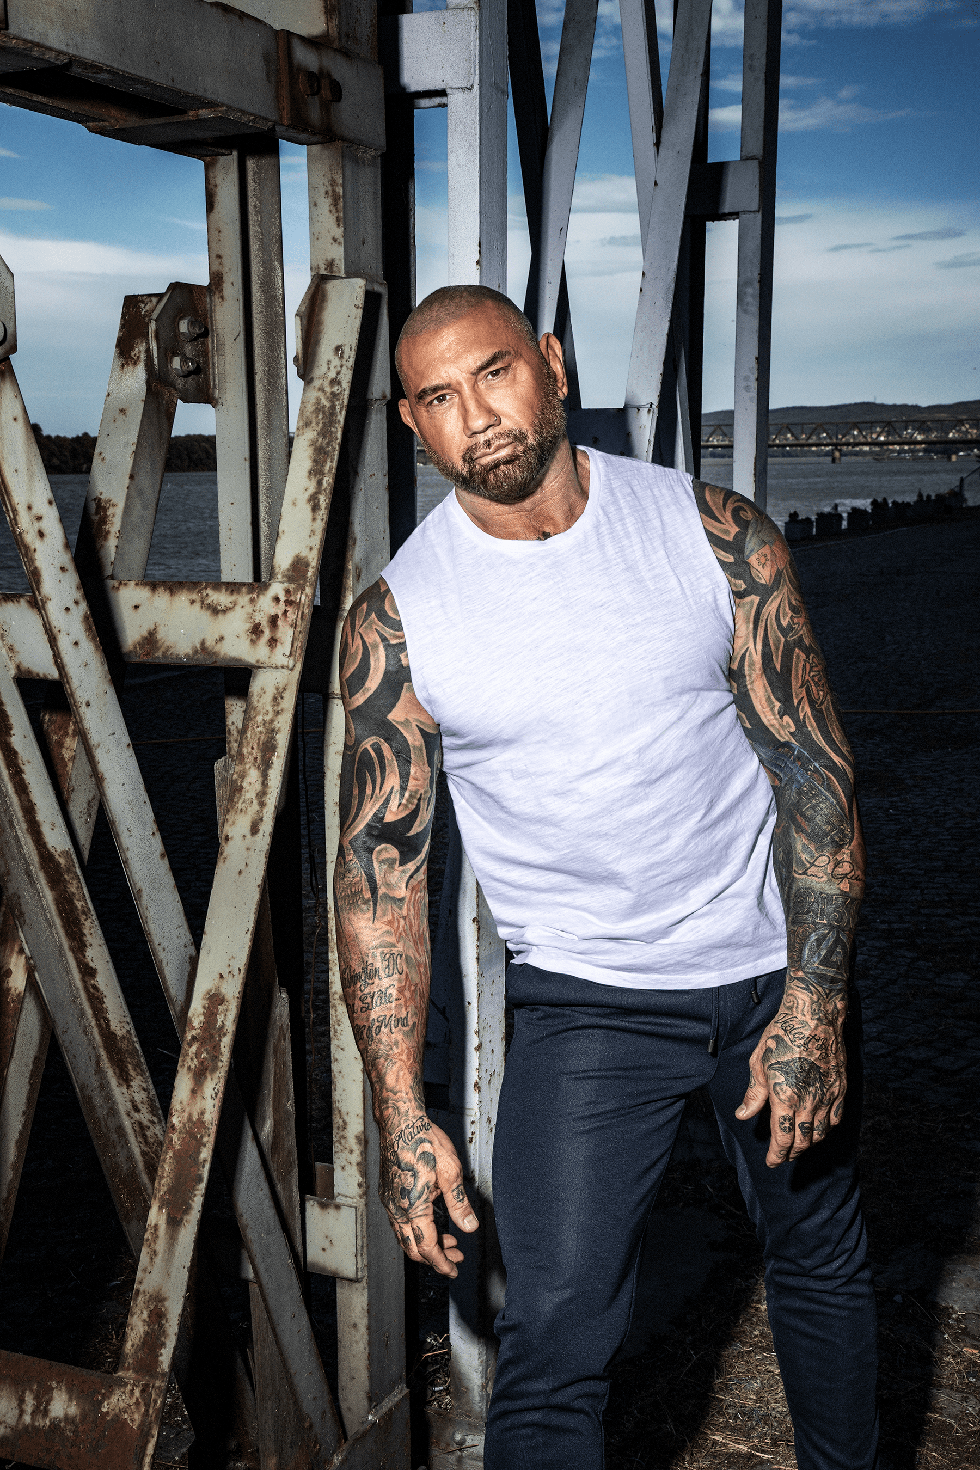 Dave Bautista young photos quotes best movies